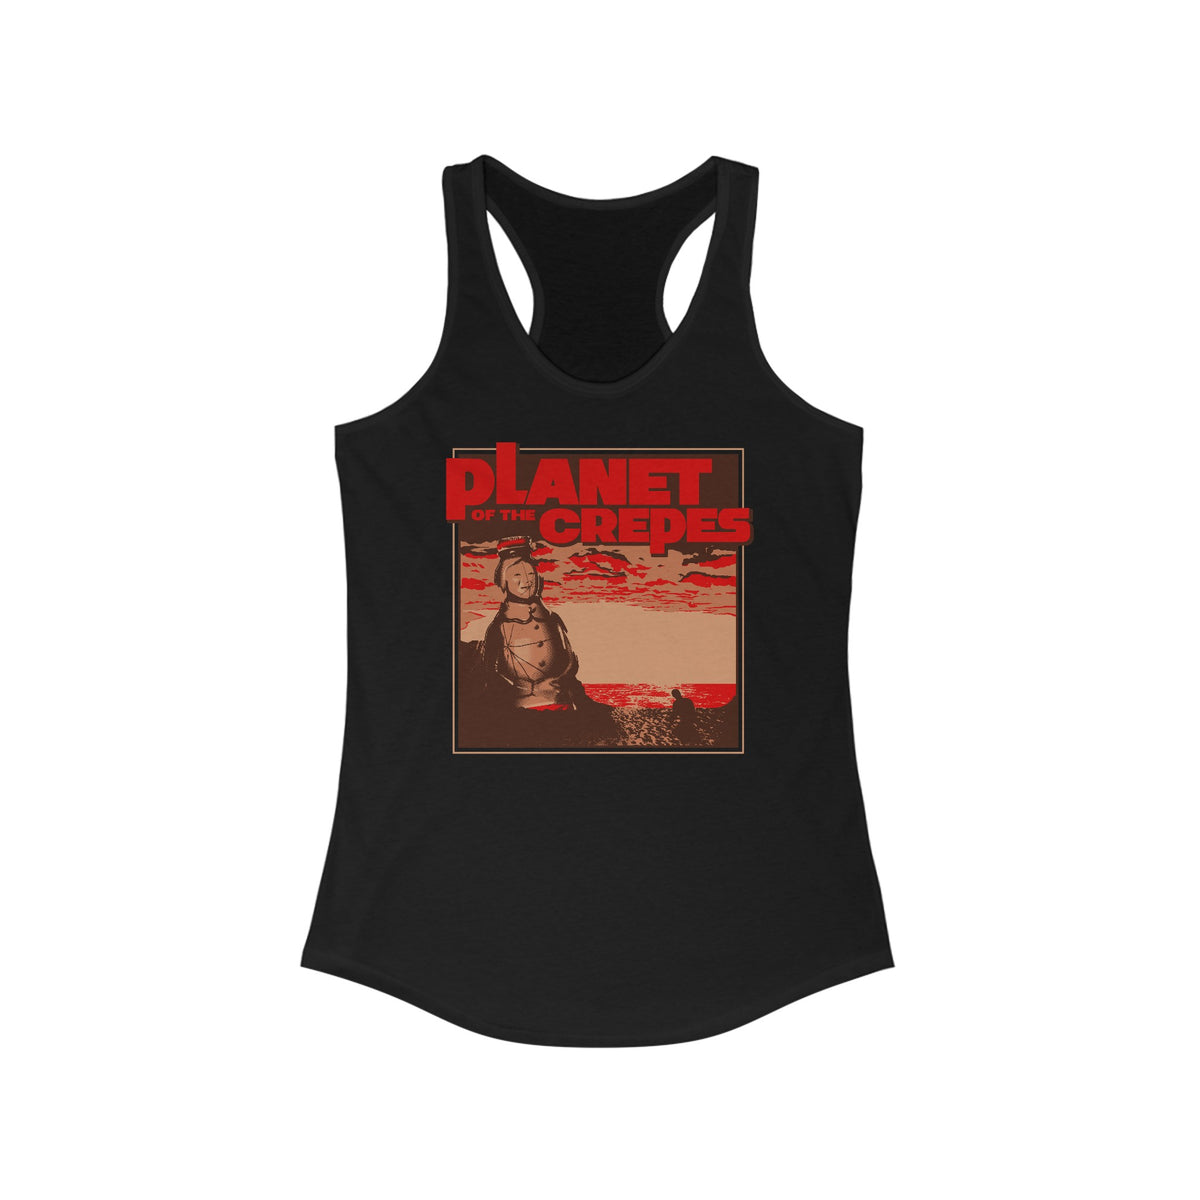 Planet Of The Crepes - Women's Racerback Tank